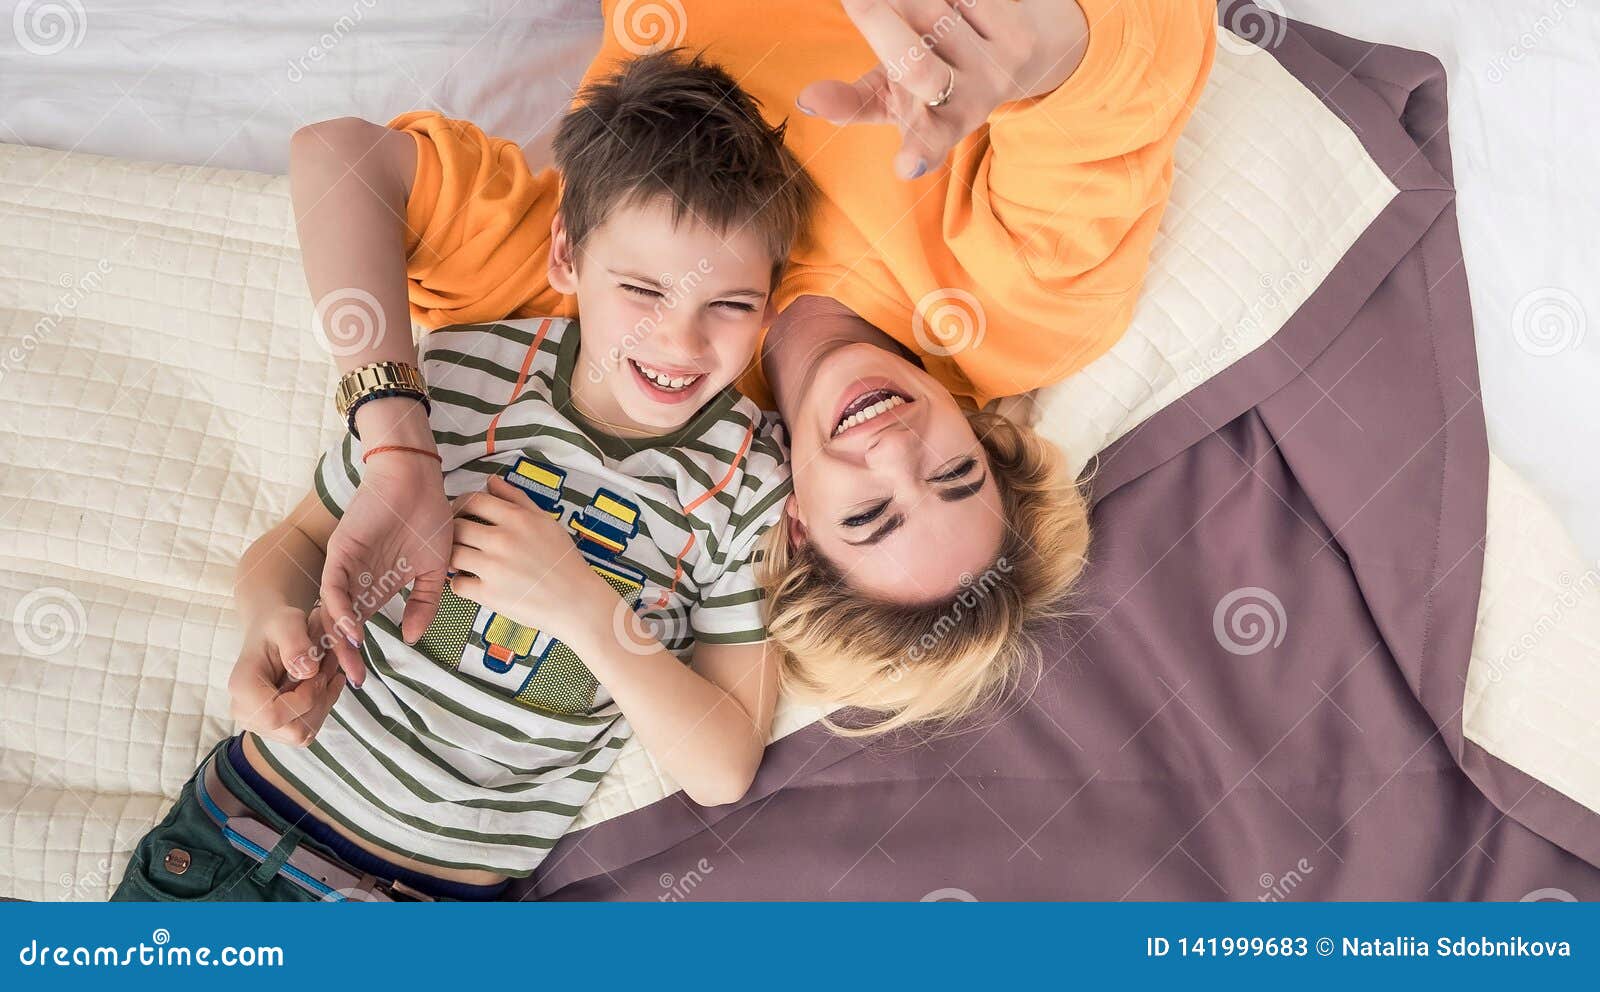 Mother With Son On Bed Mother And Son Having Fun Stock Image Image